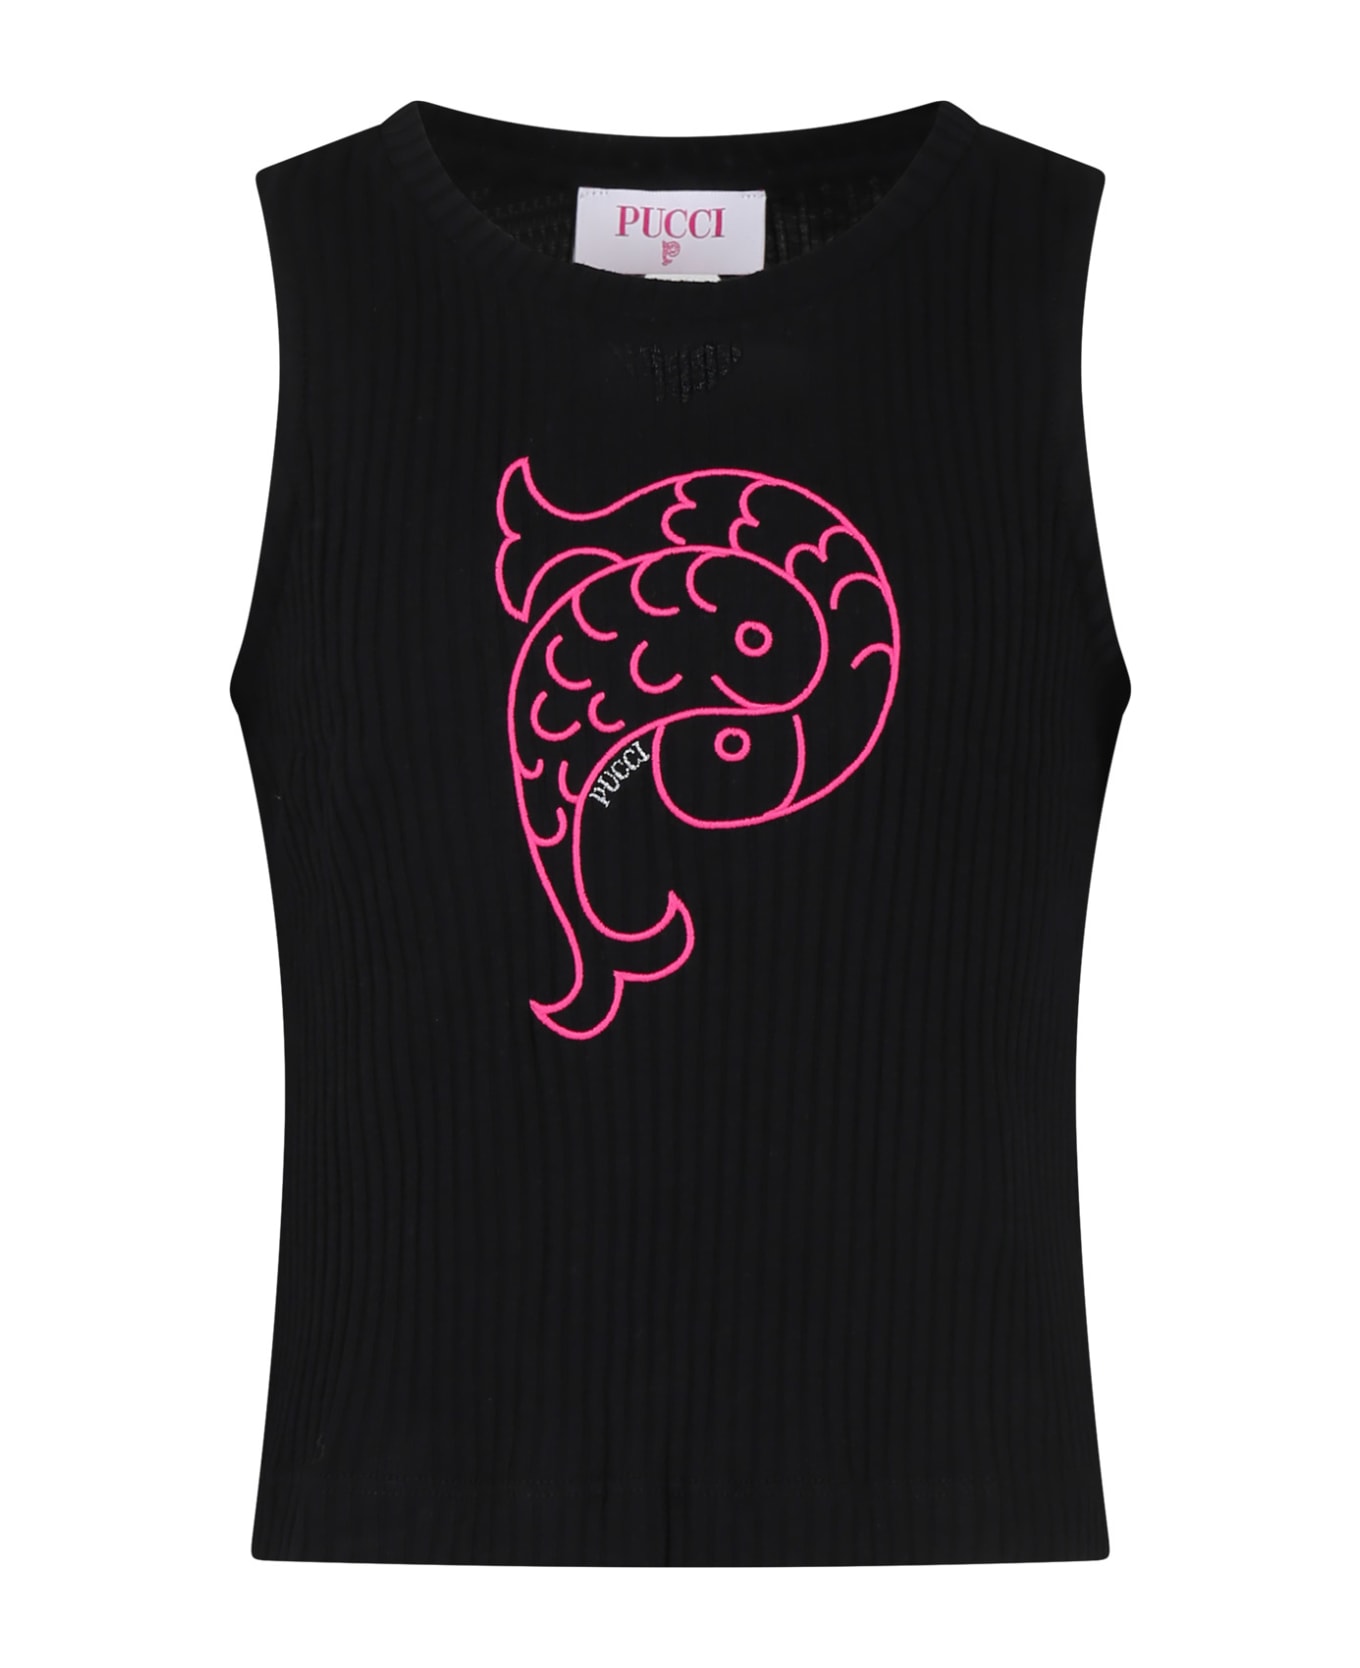 Pucci Black Tank Top For Girl With Logo - Black